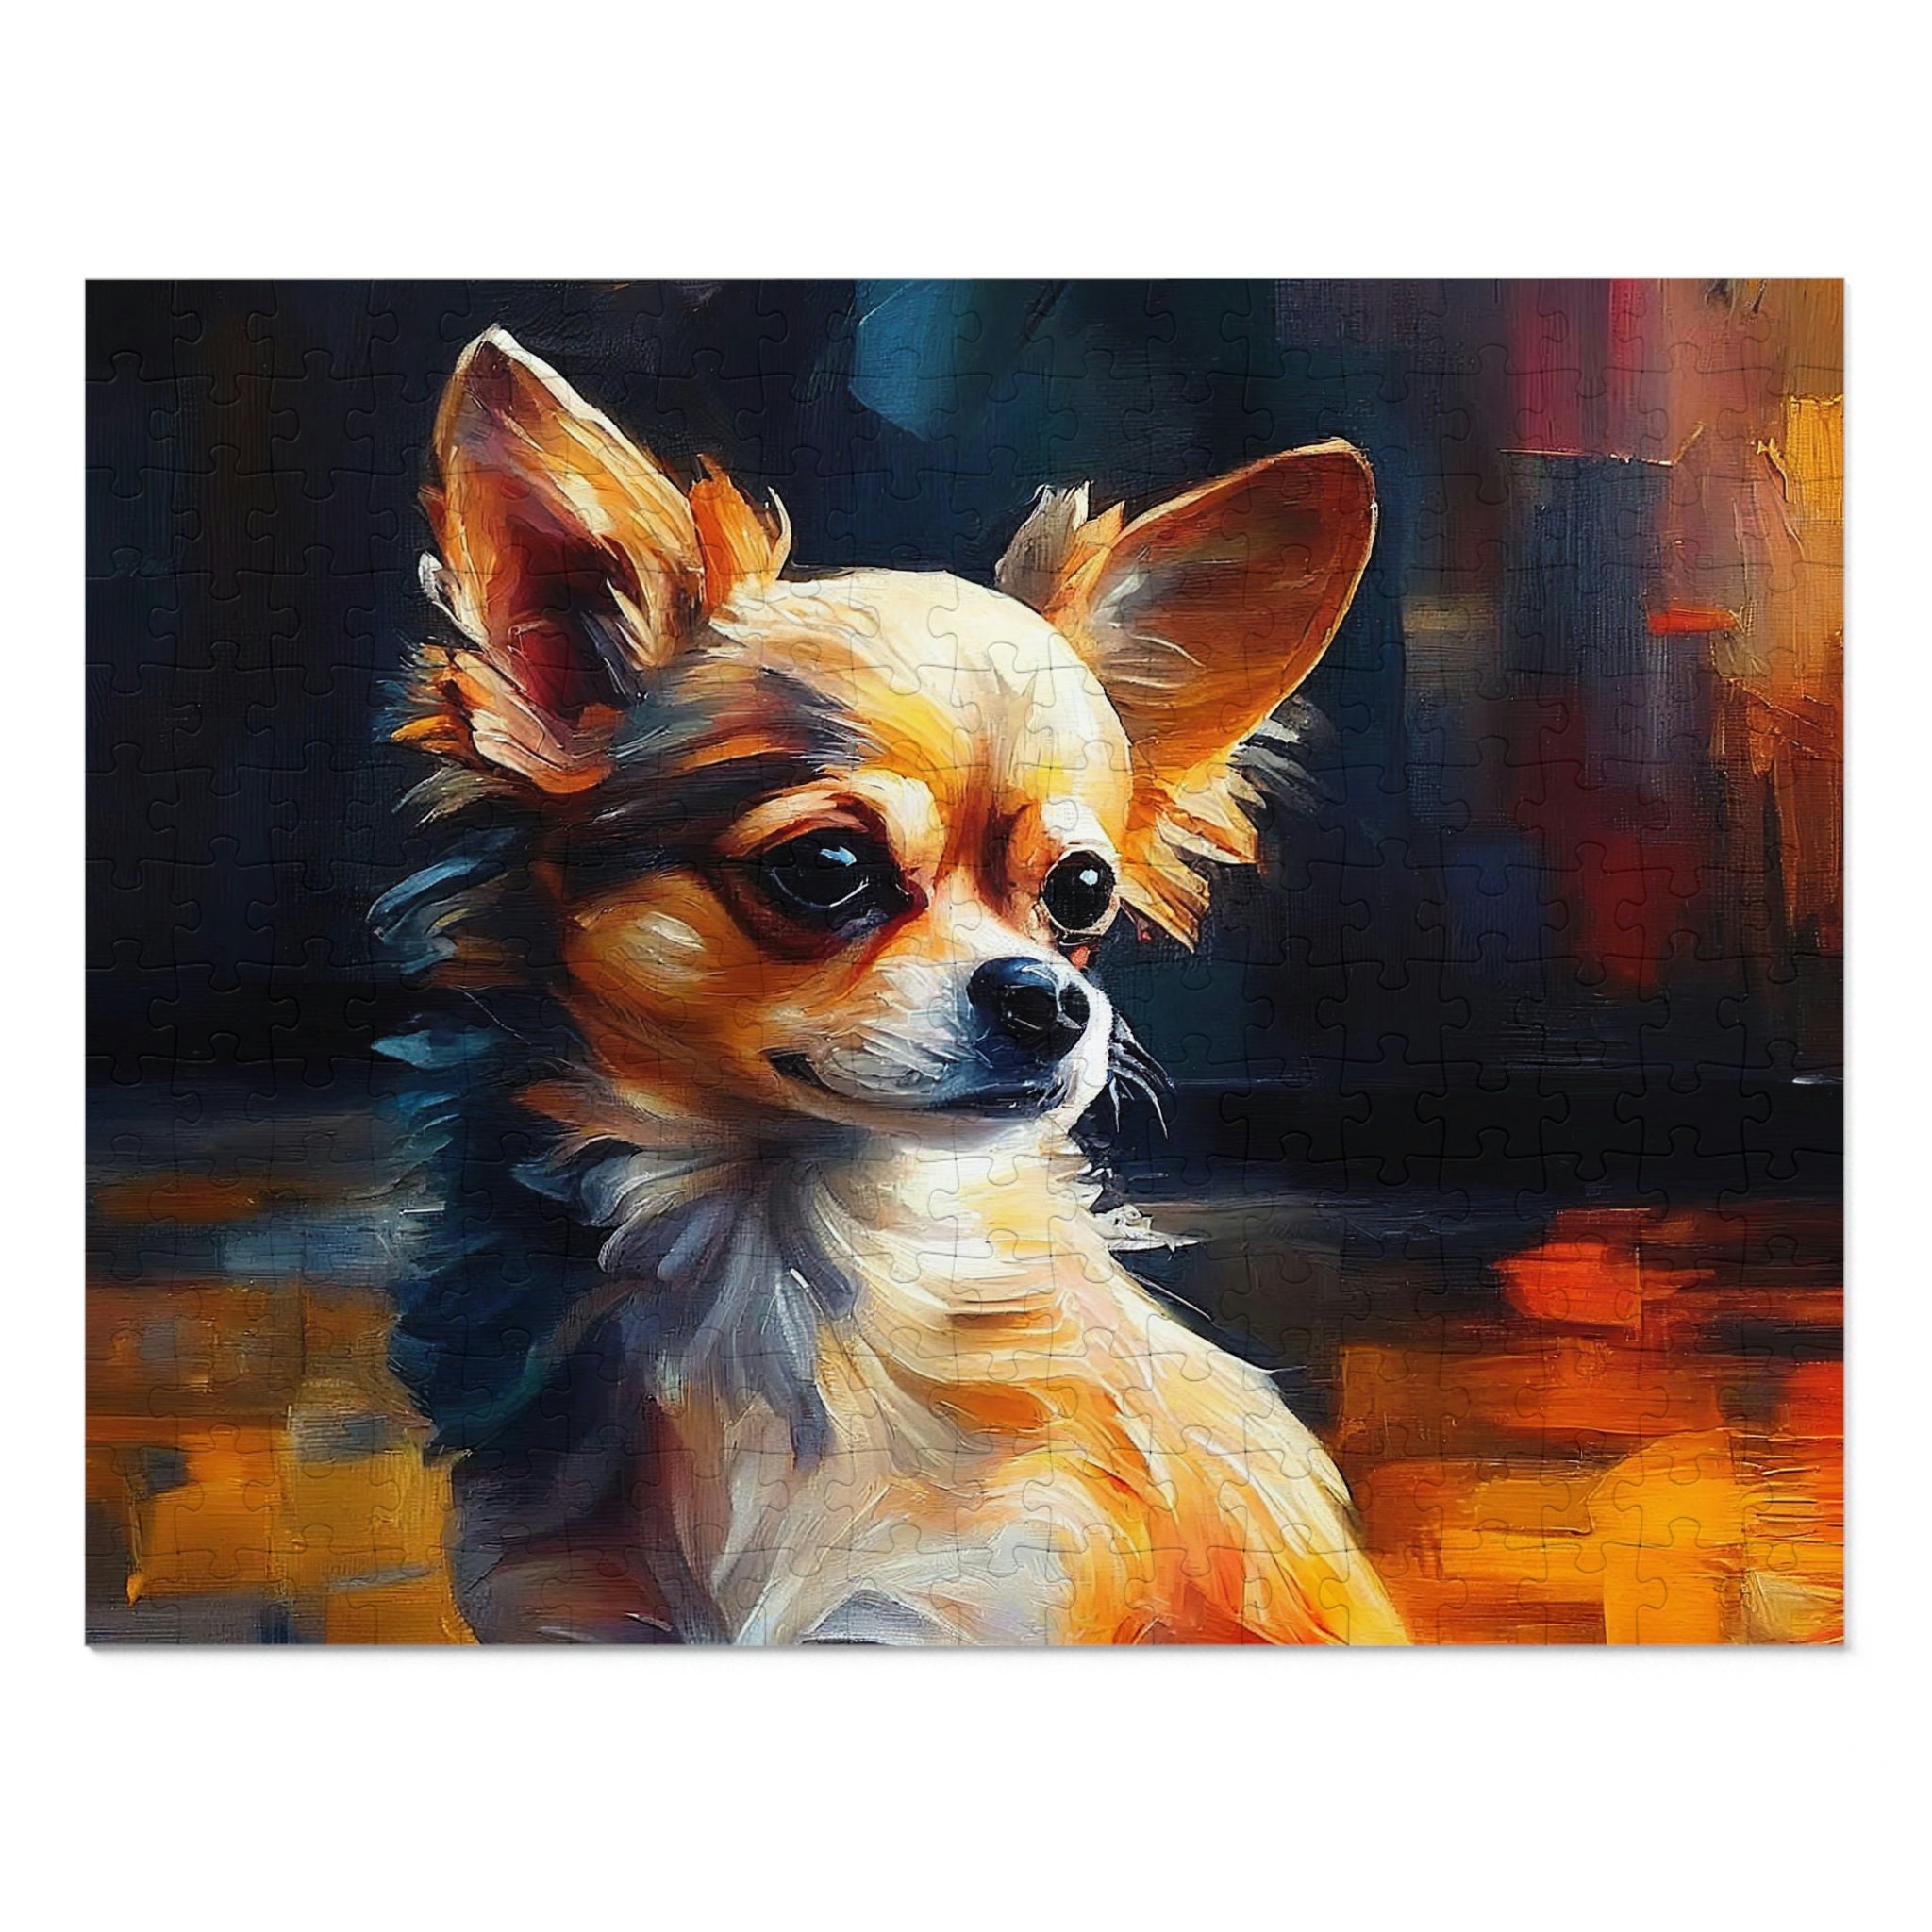 Dream Bay Chihuahua Dogs - 300 Piece Jigsaw Puzzle for Adults and Kids